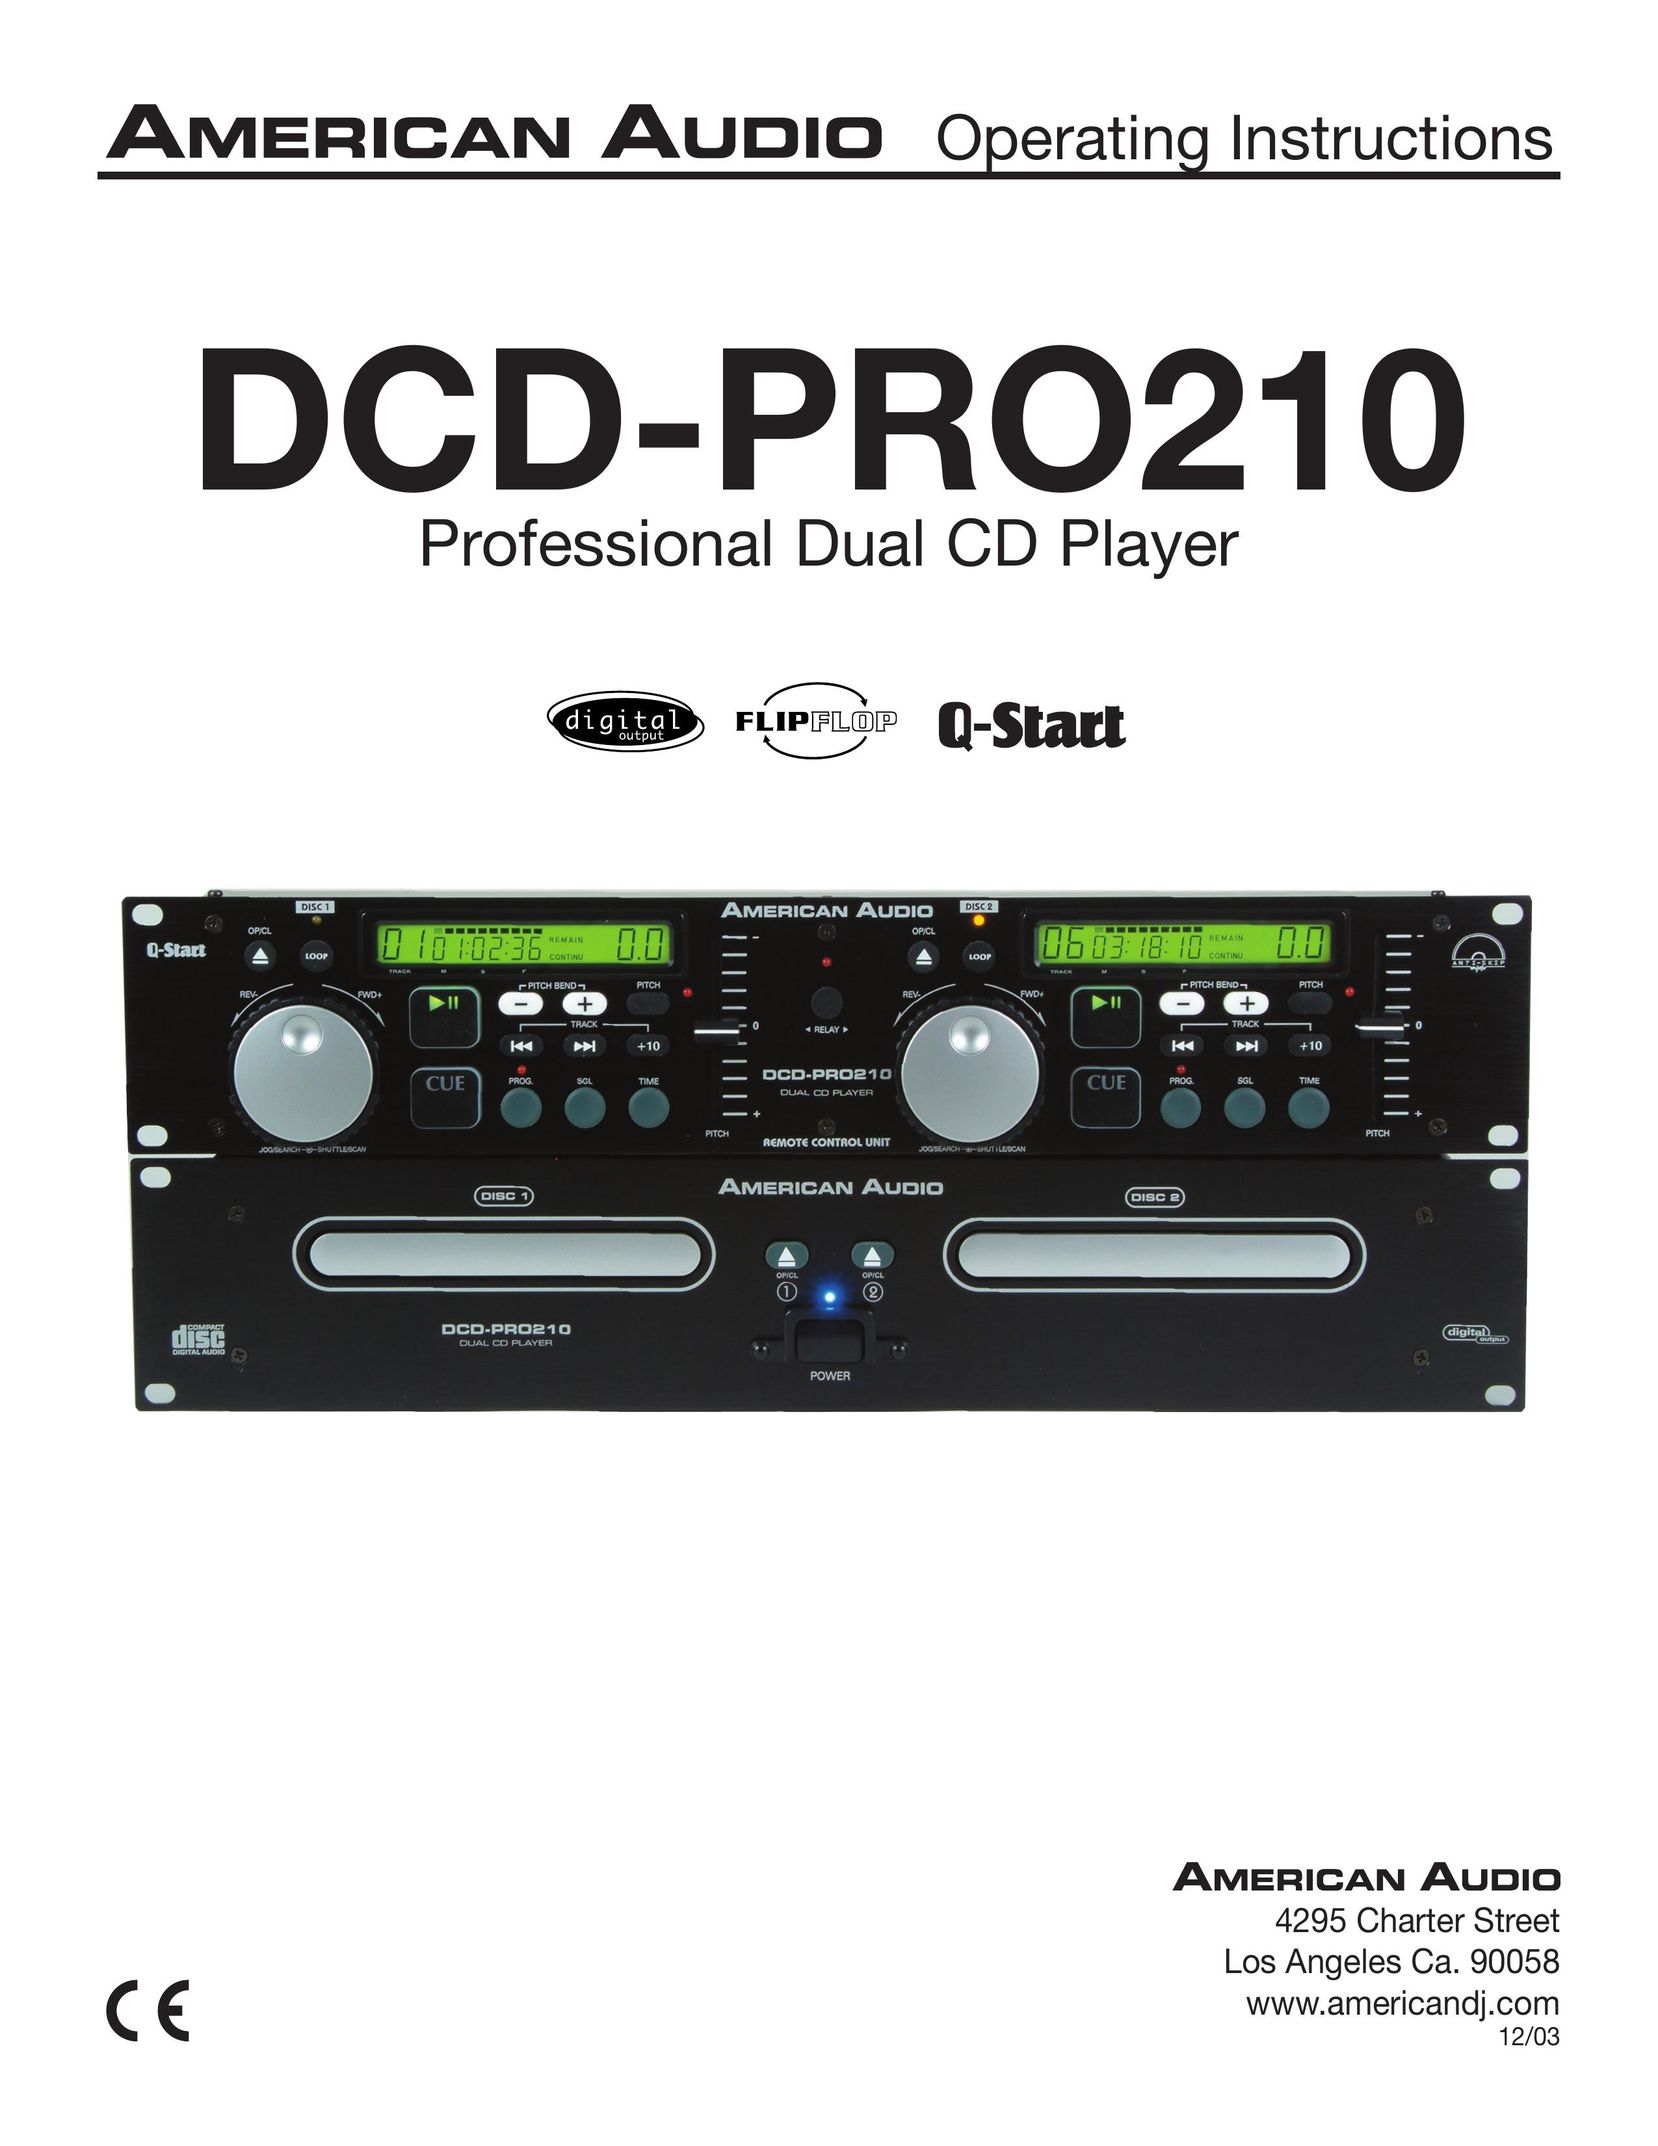 American Audio DCD-PRO210 CD Player User Manual (Page 1)